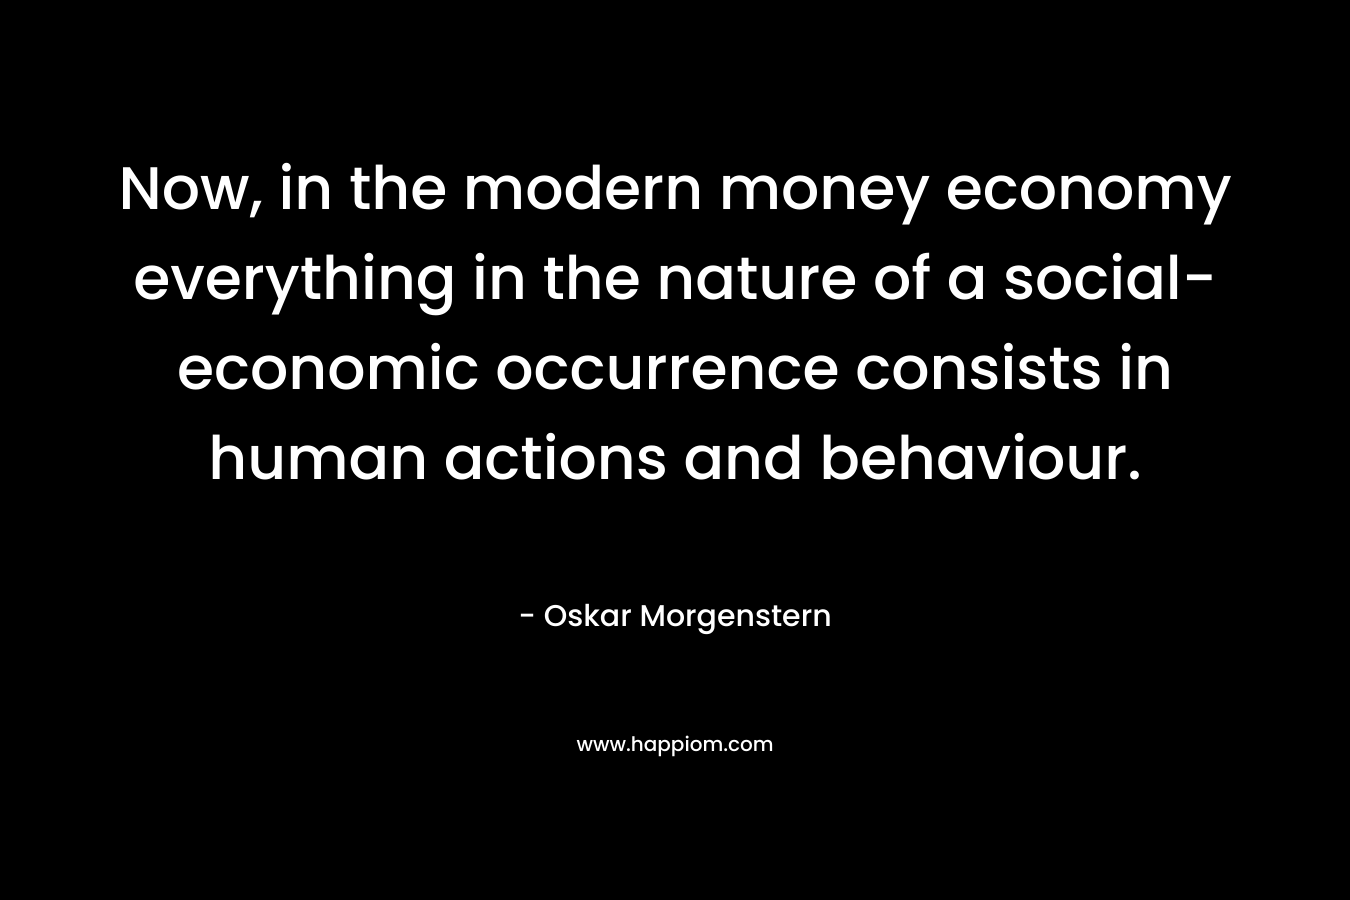 Now, in the modern money economy everything in the nature of a social-economic occurrence consists in human actions and behaviour. – Oskar Morgenstern